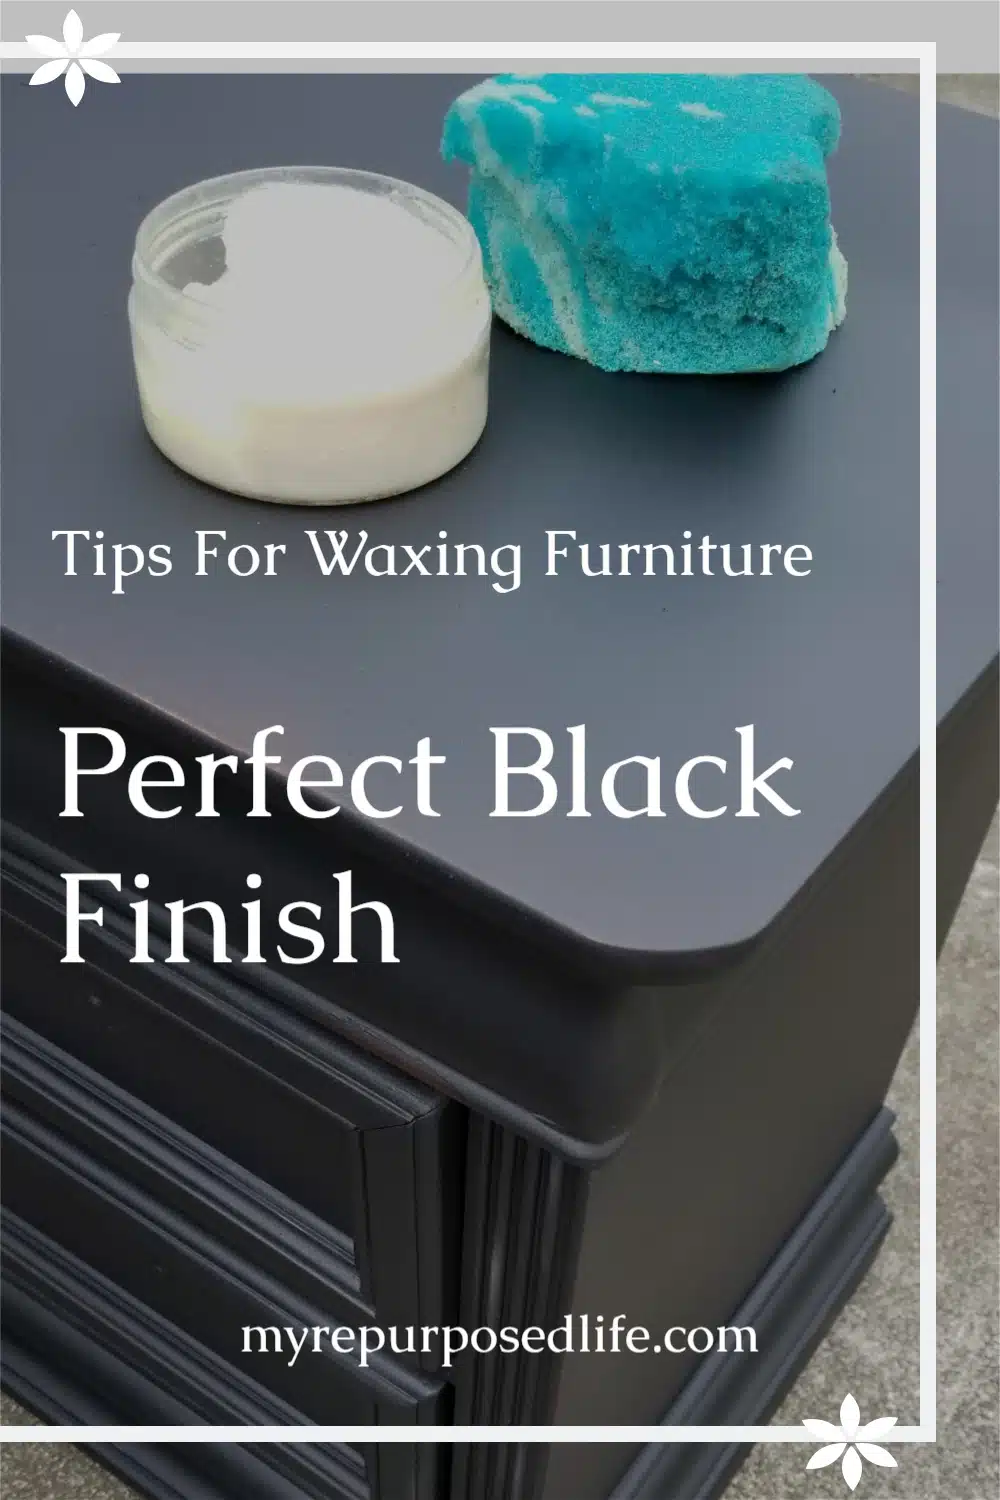 These vintage black nightstands got a second chance to match a new bedroom suite. A little paint and gentle distressing make them match the new Passages bed. #MyRepurposedLife #repurposed #furniture #nightstands #makeover #waxing via @repurposedlife